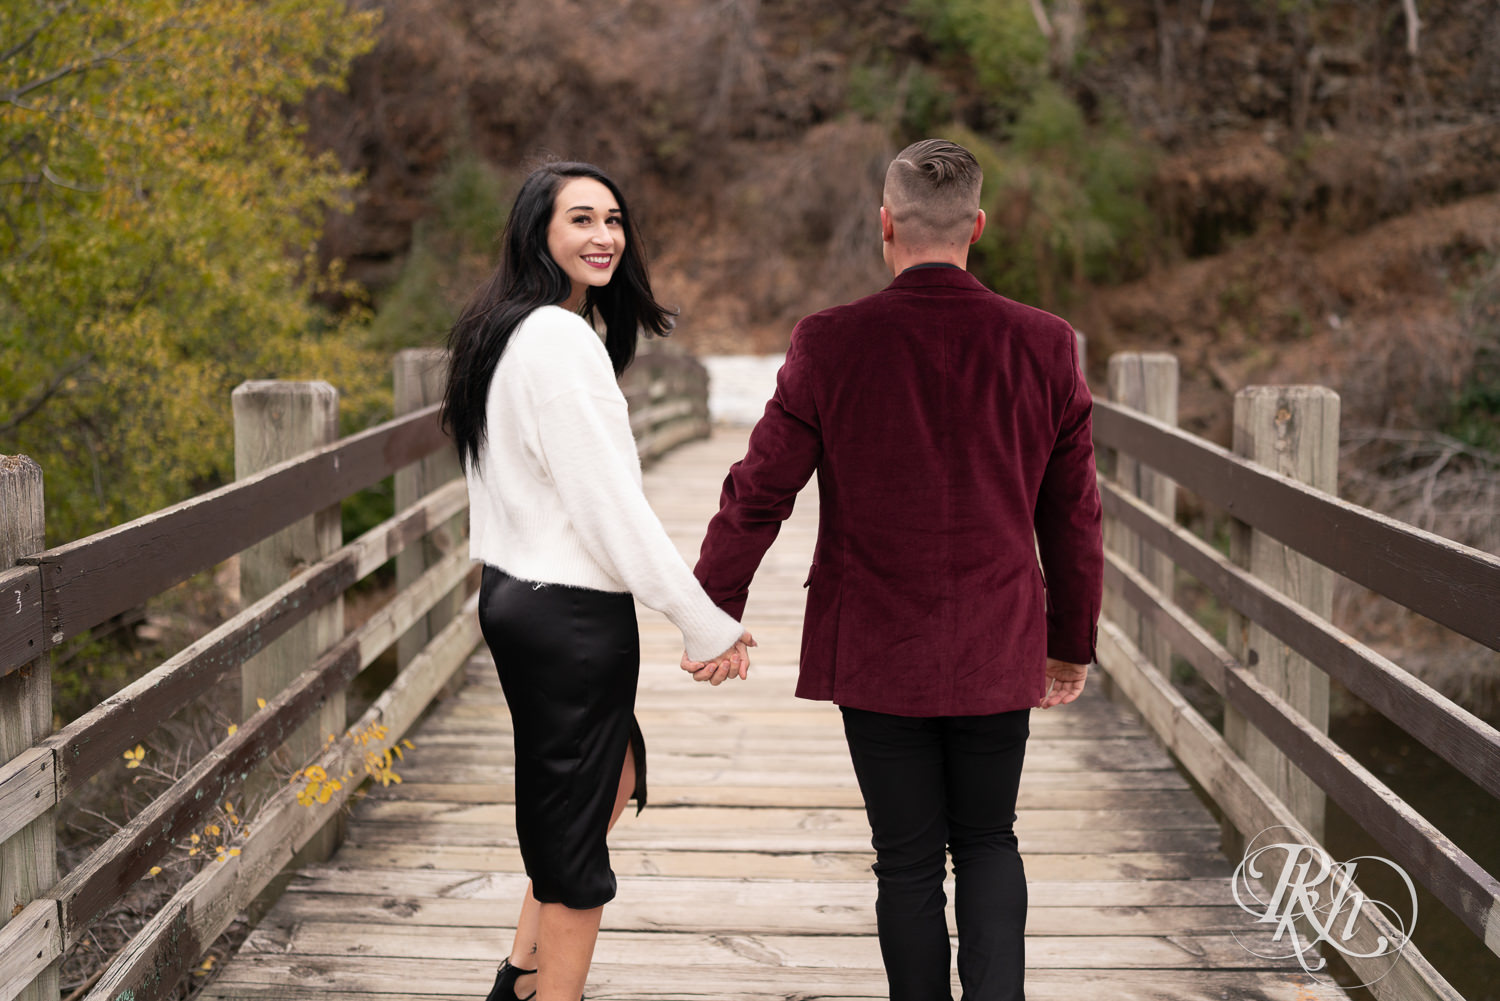 Man in black clothes and burgundy jacket and woman in black dress snuggle and smile on a trail in Minneapolis, Minnesota surrounded by fall colors.